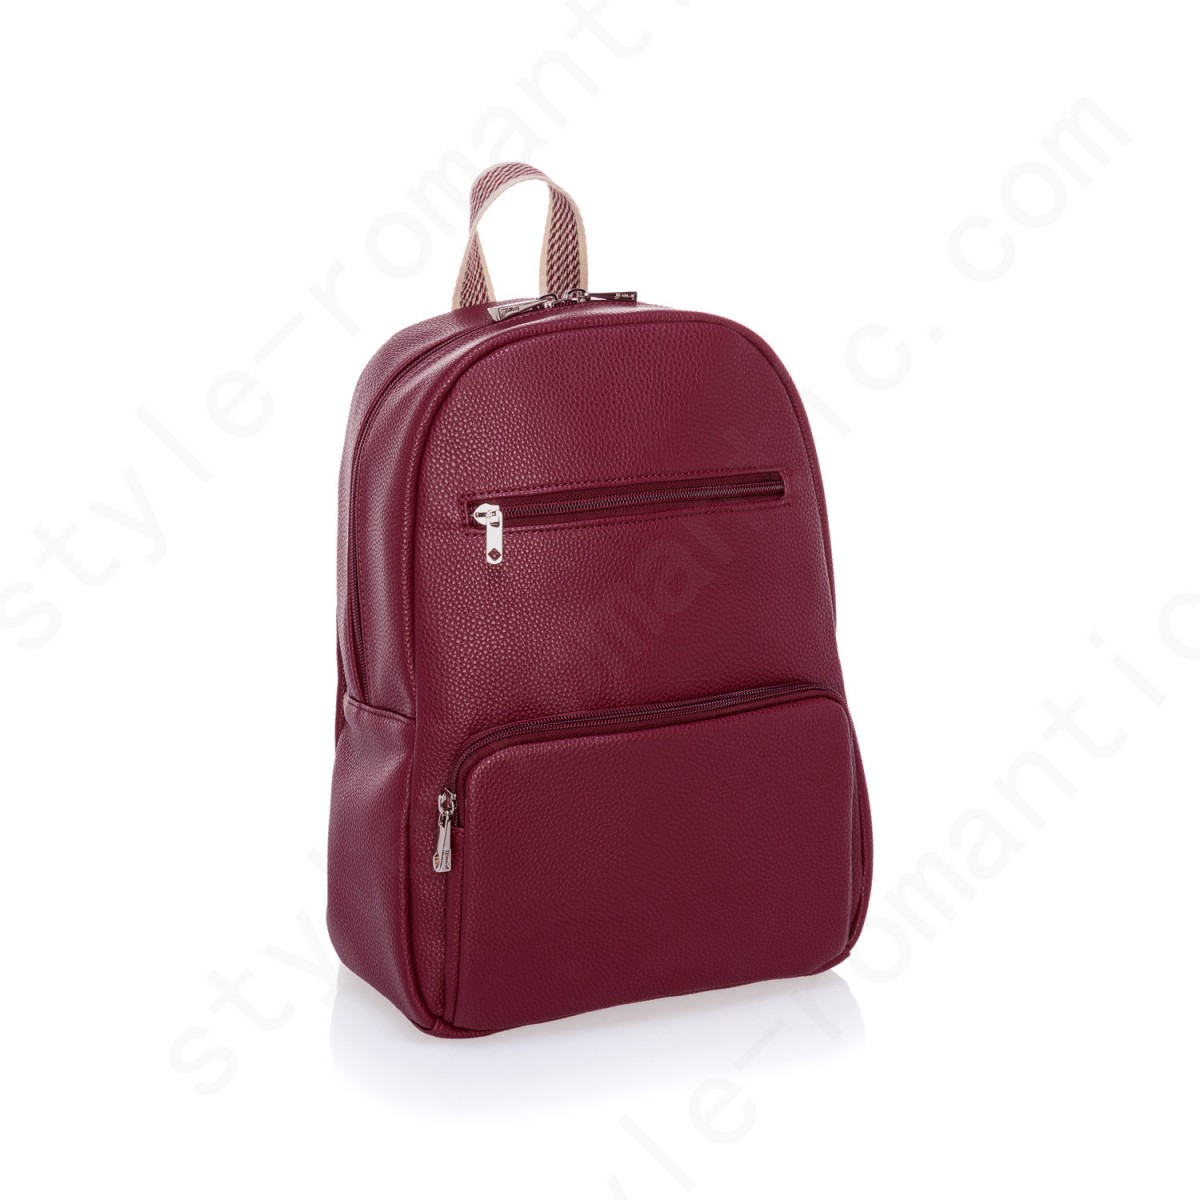 Thirty-One Gifts Boutique Backpack - Deep Merlot Pebble - -0